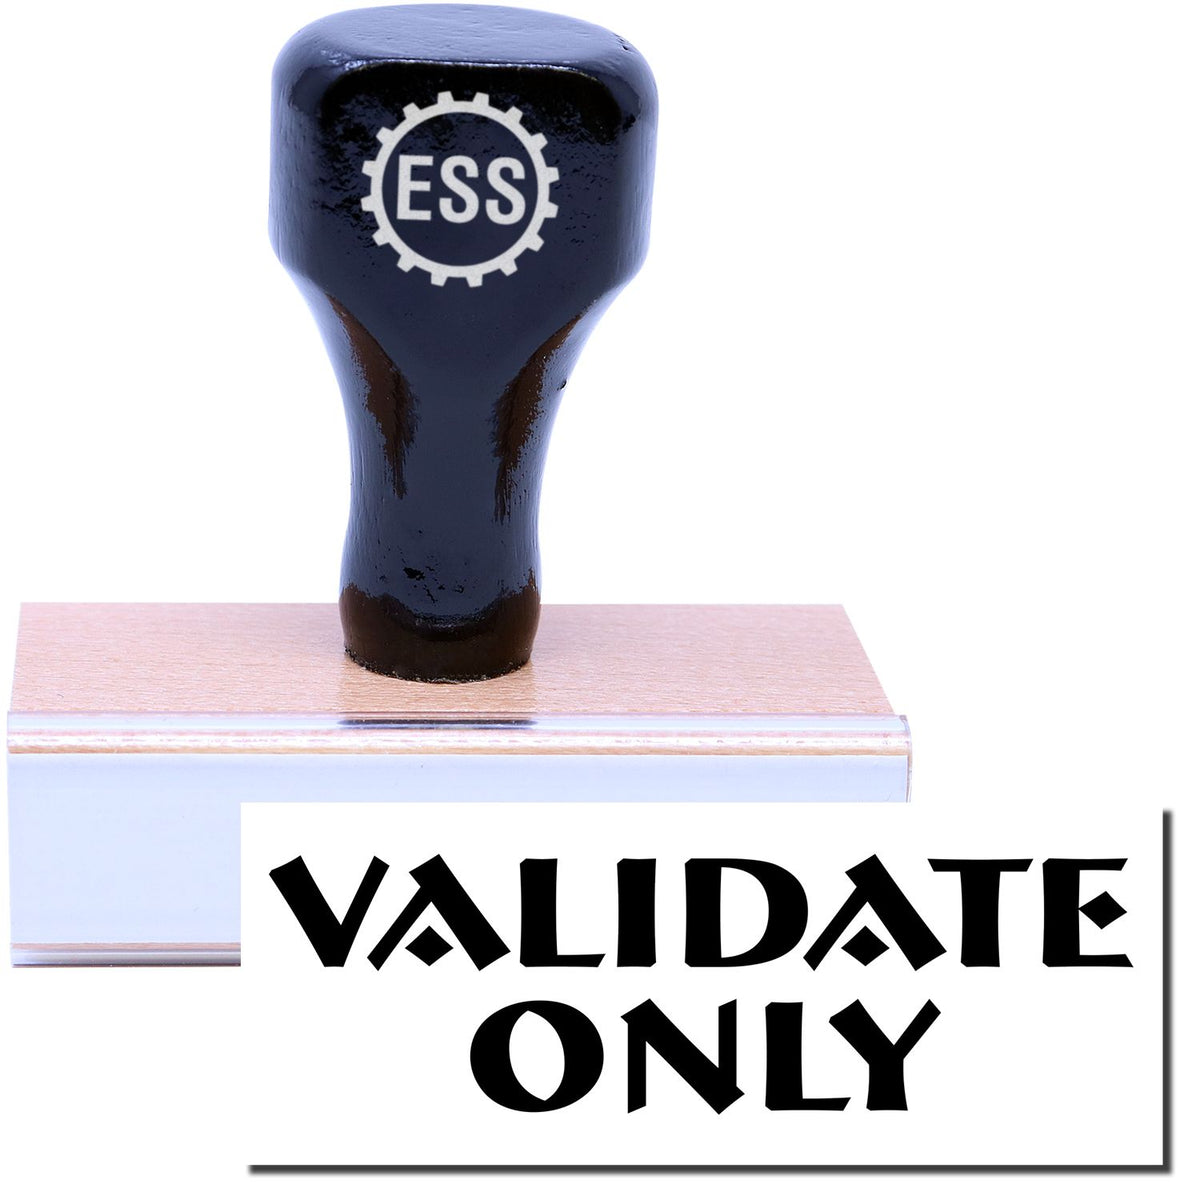 A stock office rubber stamp with a stamped image showing how the text &quot;VALIDATE ONLY&quot; is displayed after stamping.